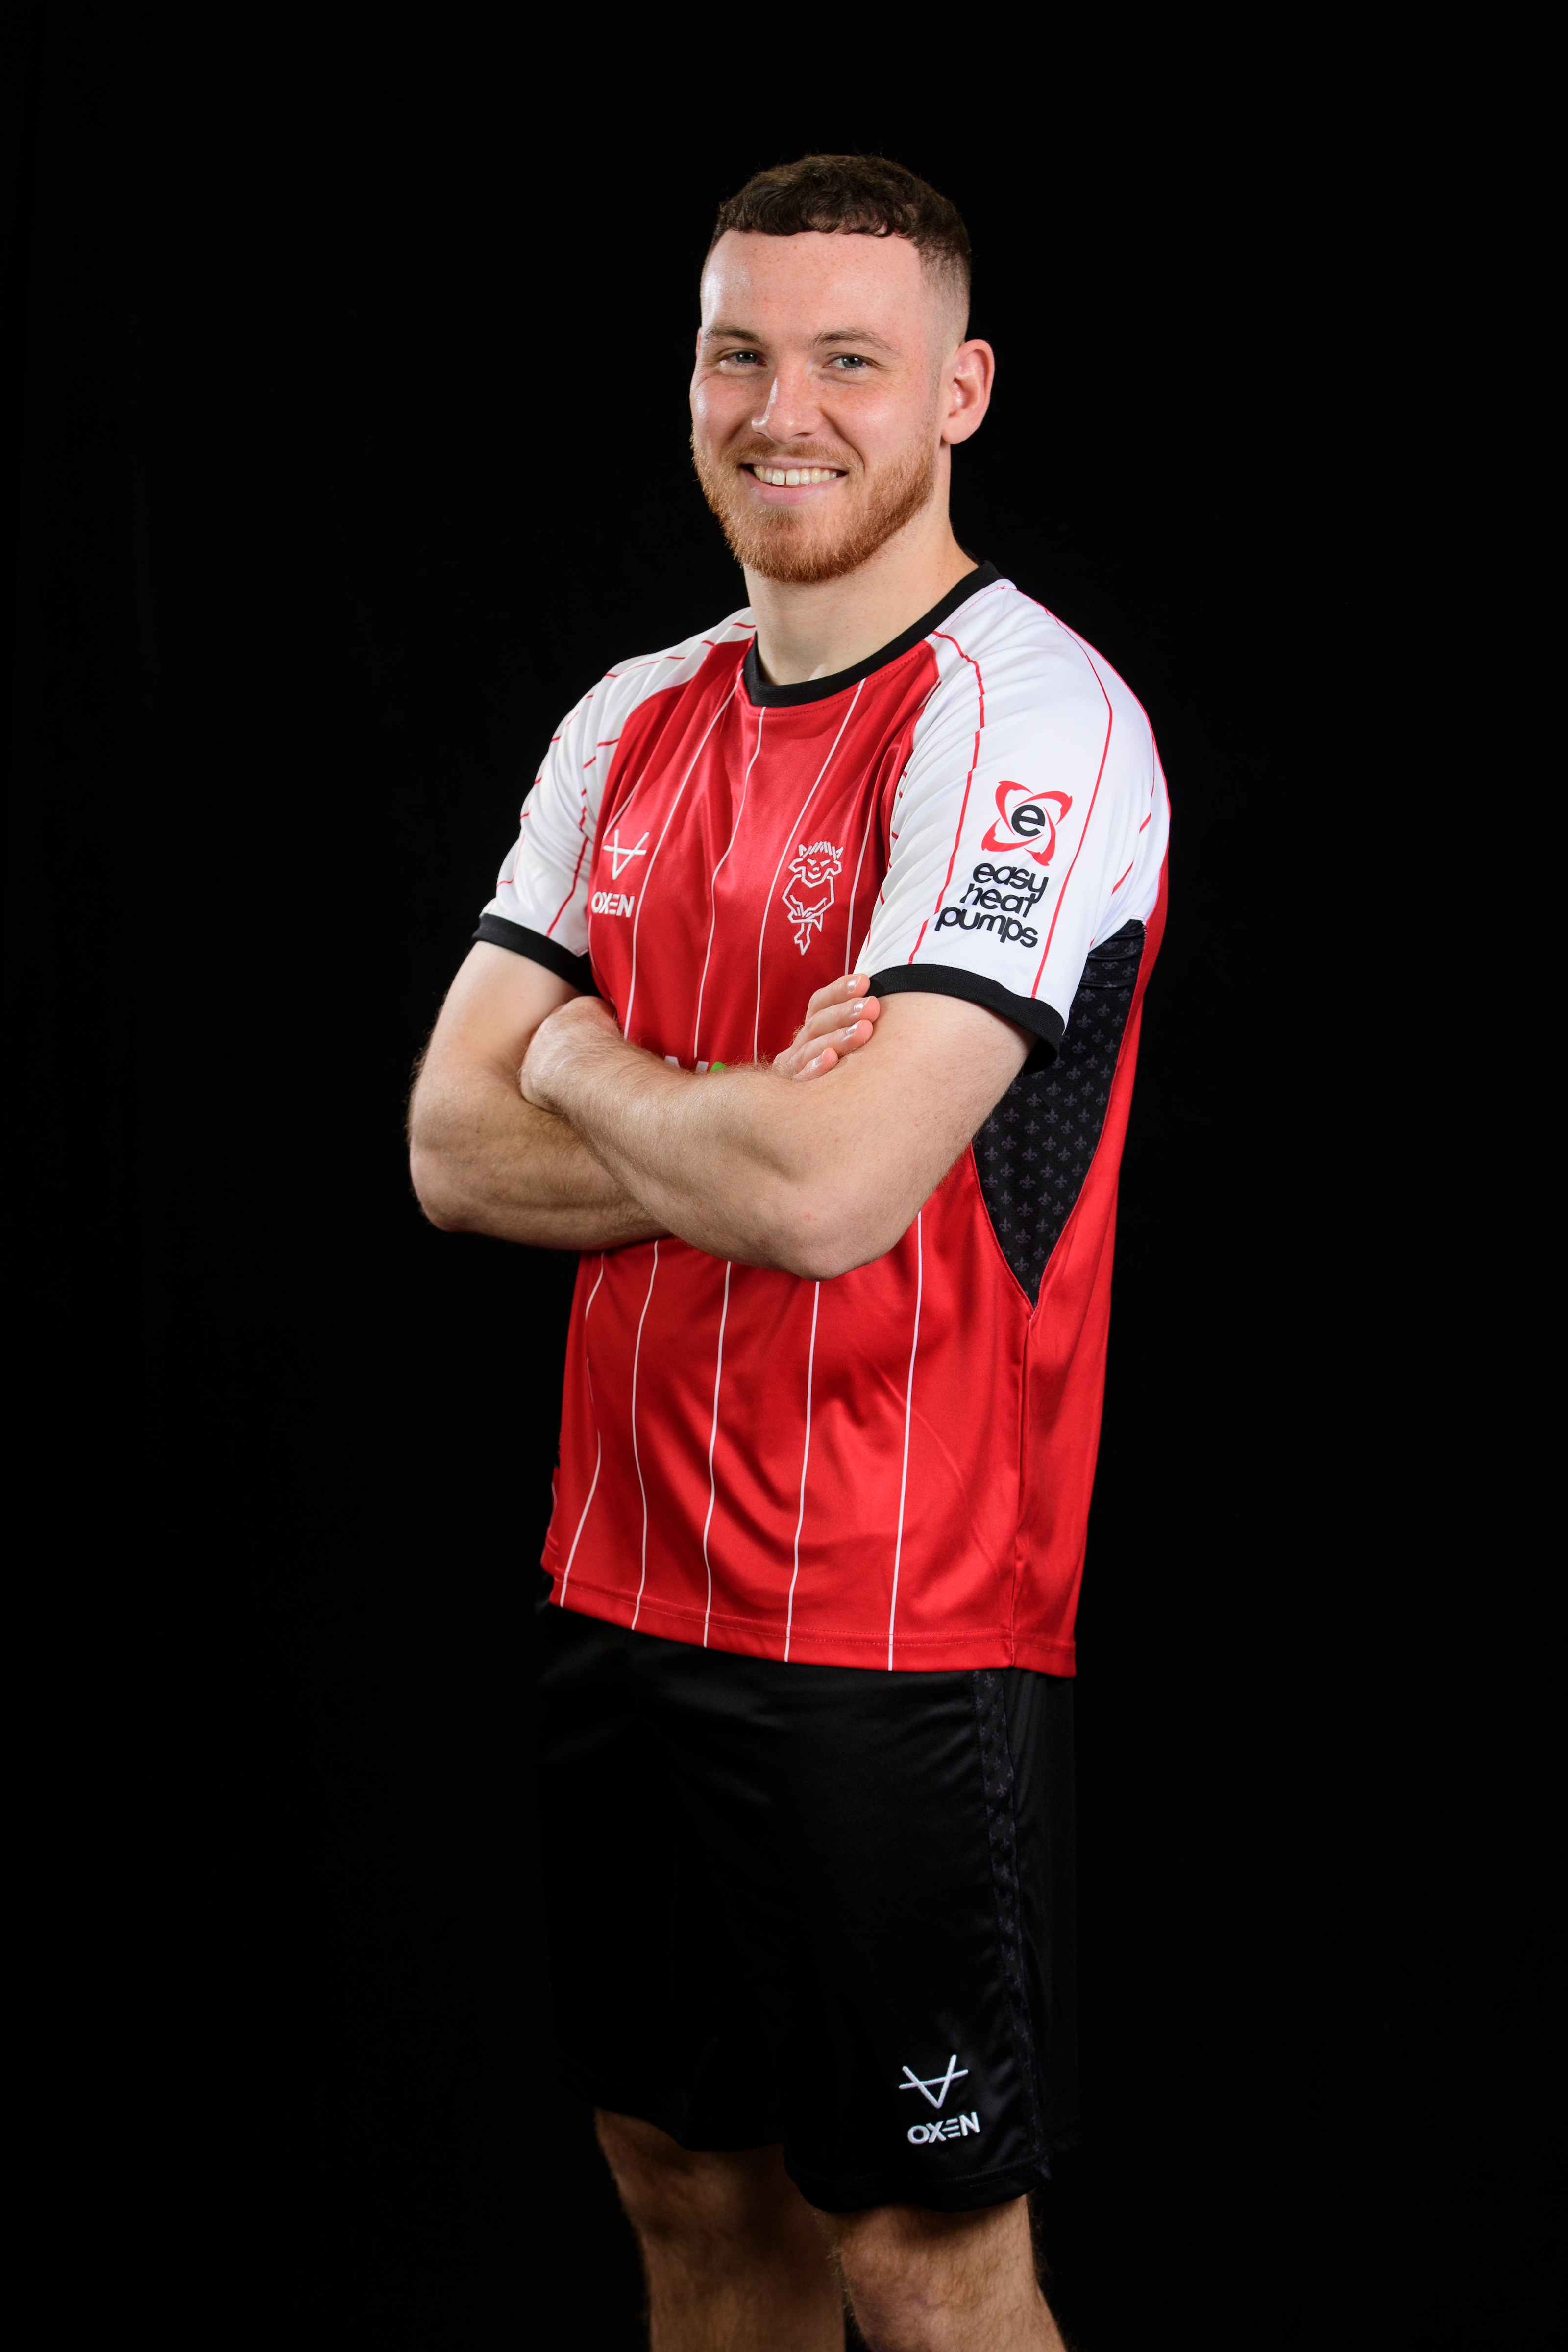 Ben House pictured wearing the 24/25 home kit. His arms are crossed and the Easy Heat Pumps logo is clear on the left arm.